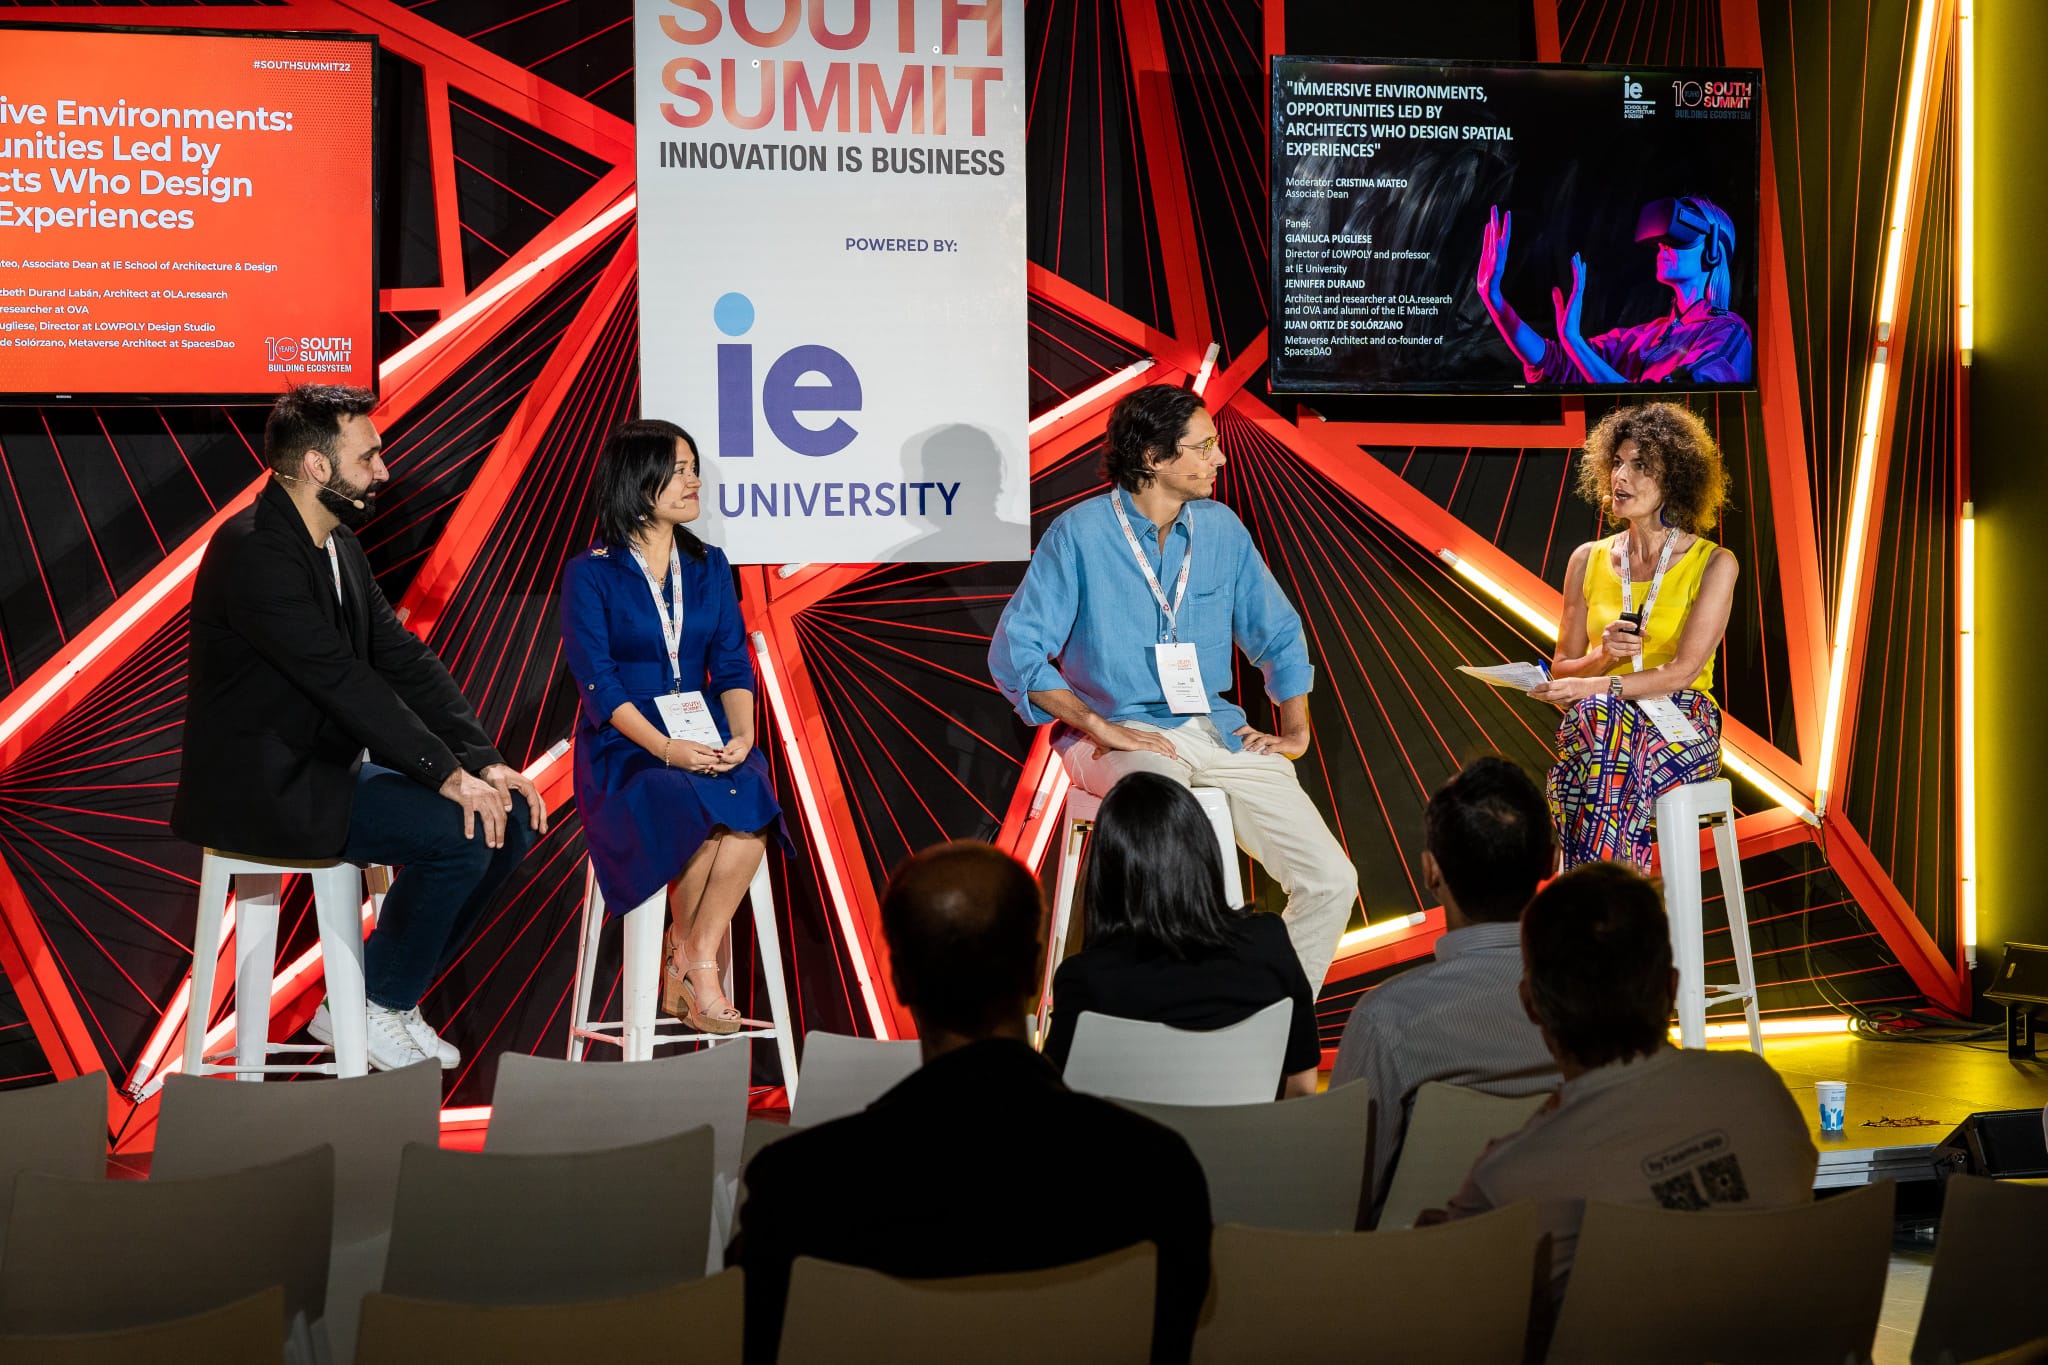 South Summit 2022, powered by IE University